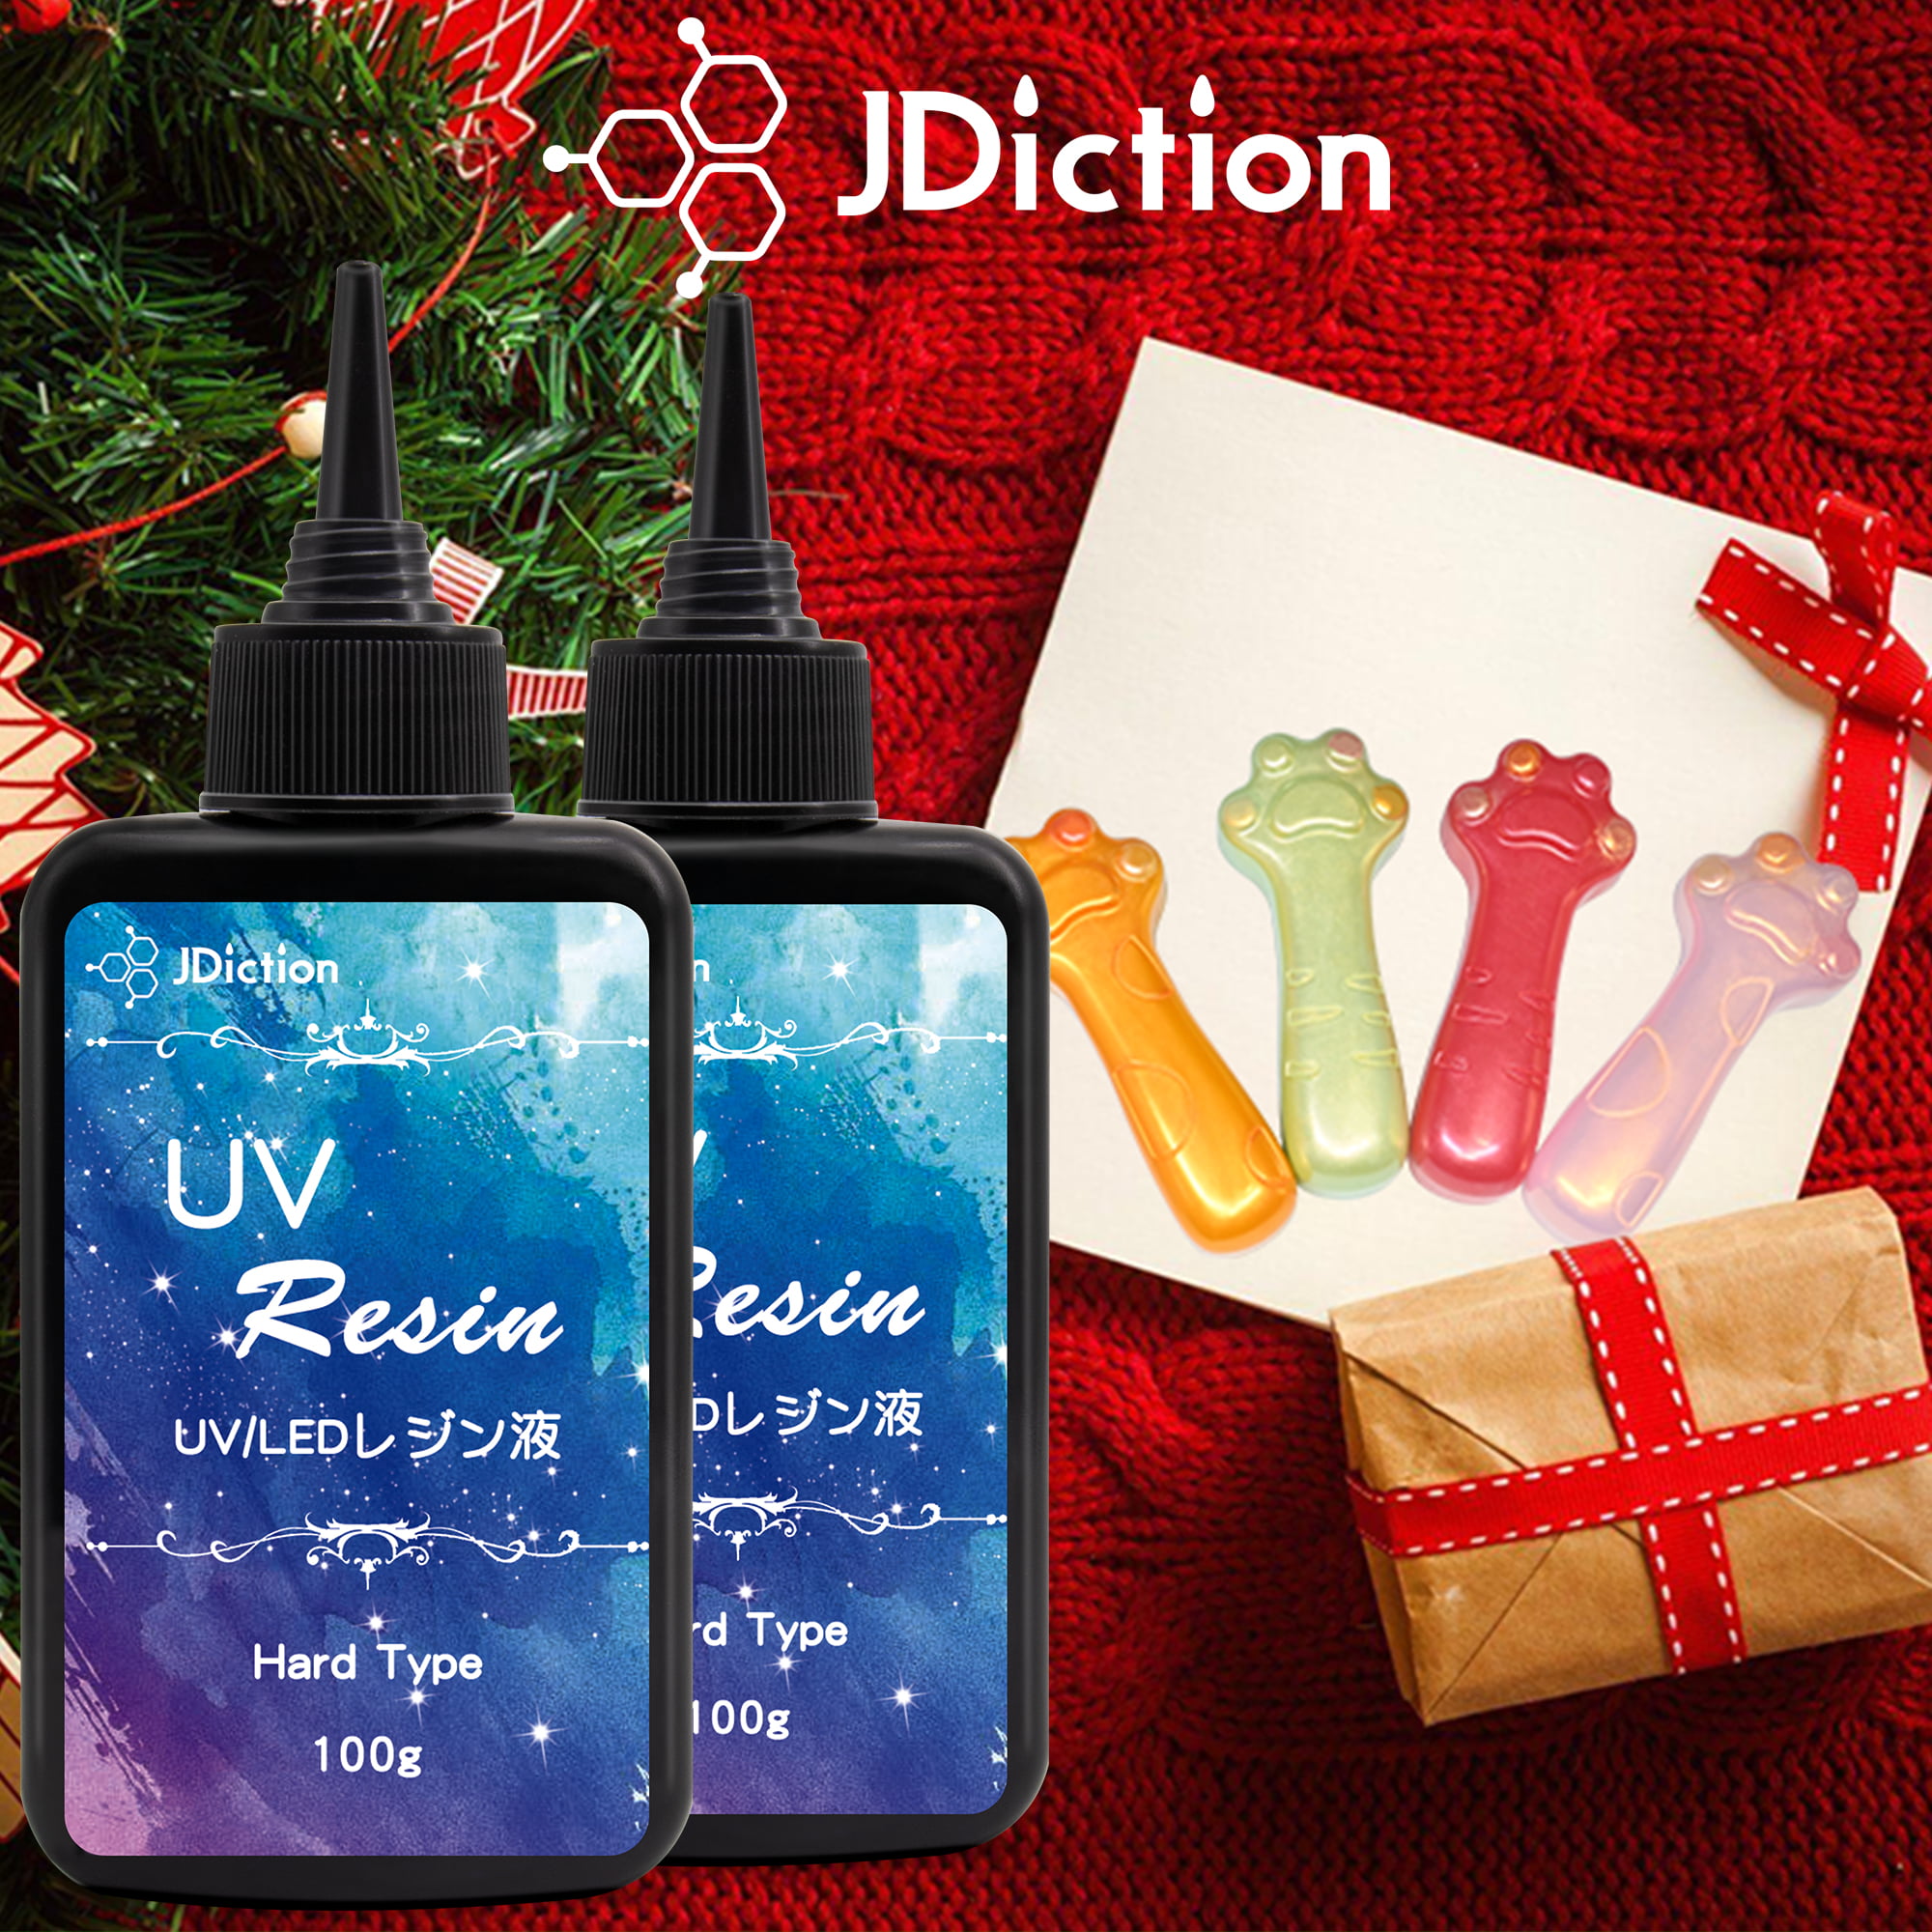 JDiction - Where are JDiction's friends in Germany? ! New Arrival!🙌 JDiction  UV resin with light kit is finally on sale! Apply - ✓ LPWU8C7J ✓ - to get  25% OFF. Just